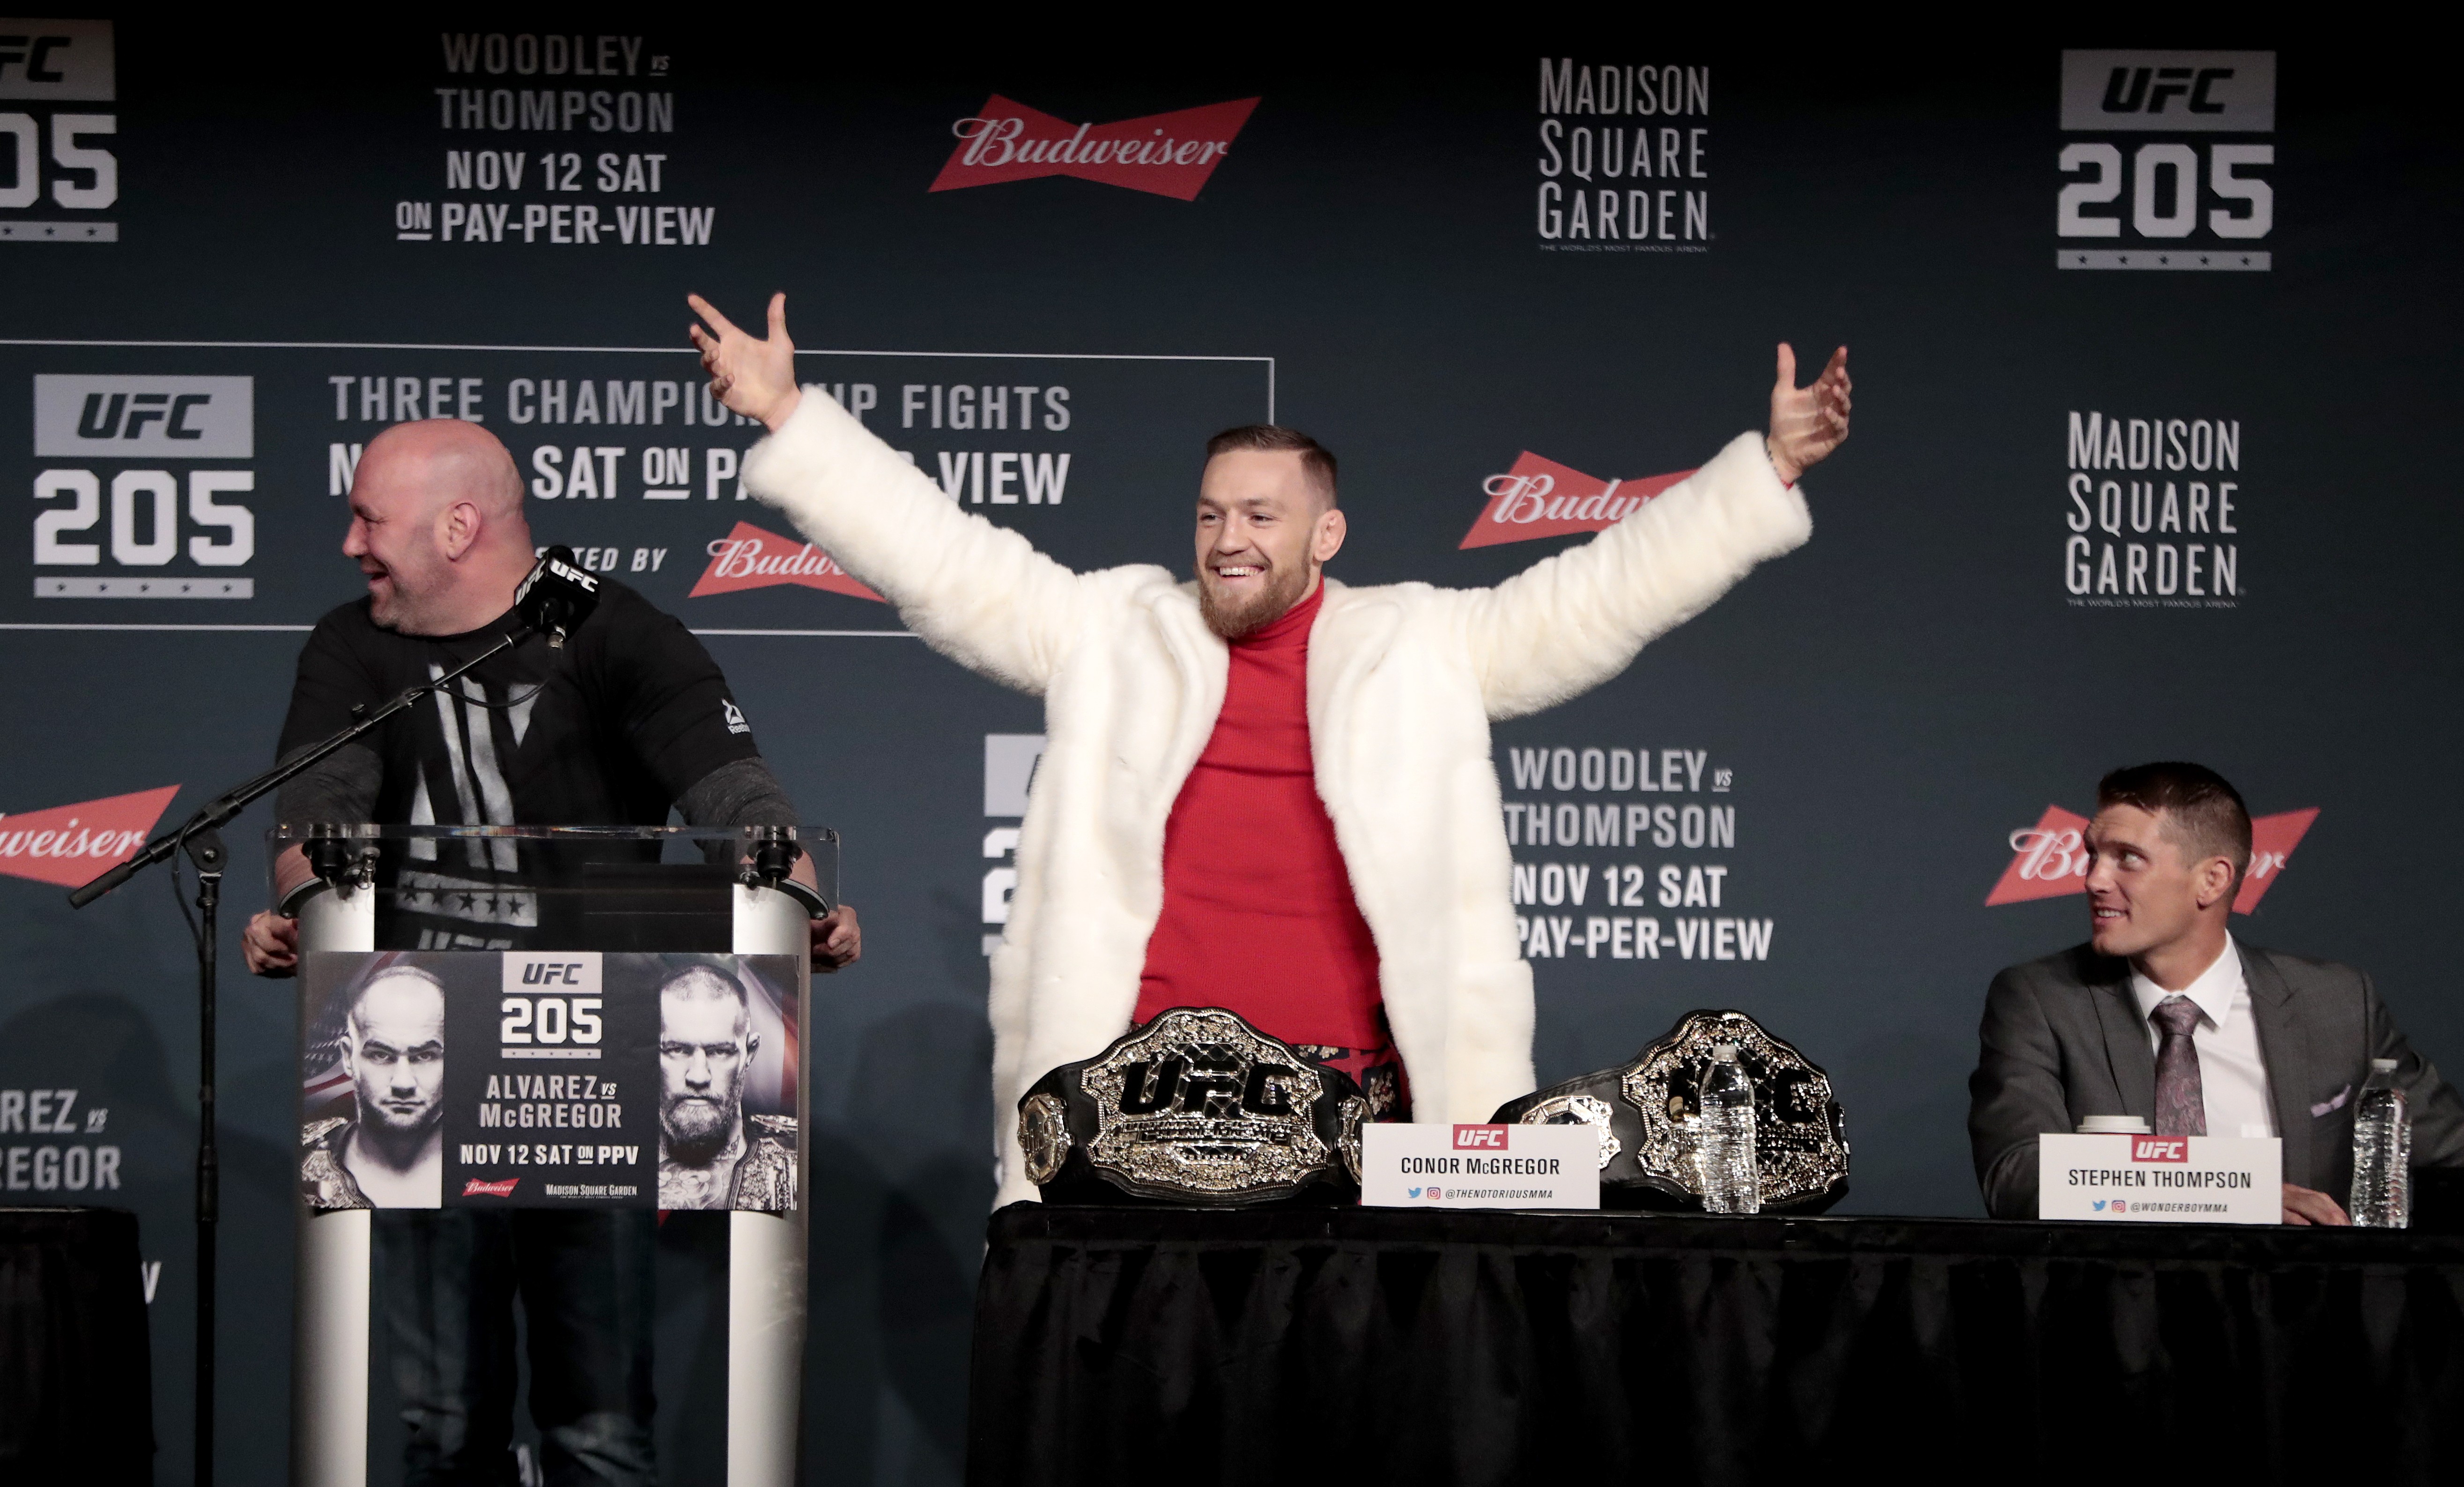 Conor McGregor arrives late at a pre-fight press conference in 2016. Photo: AP